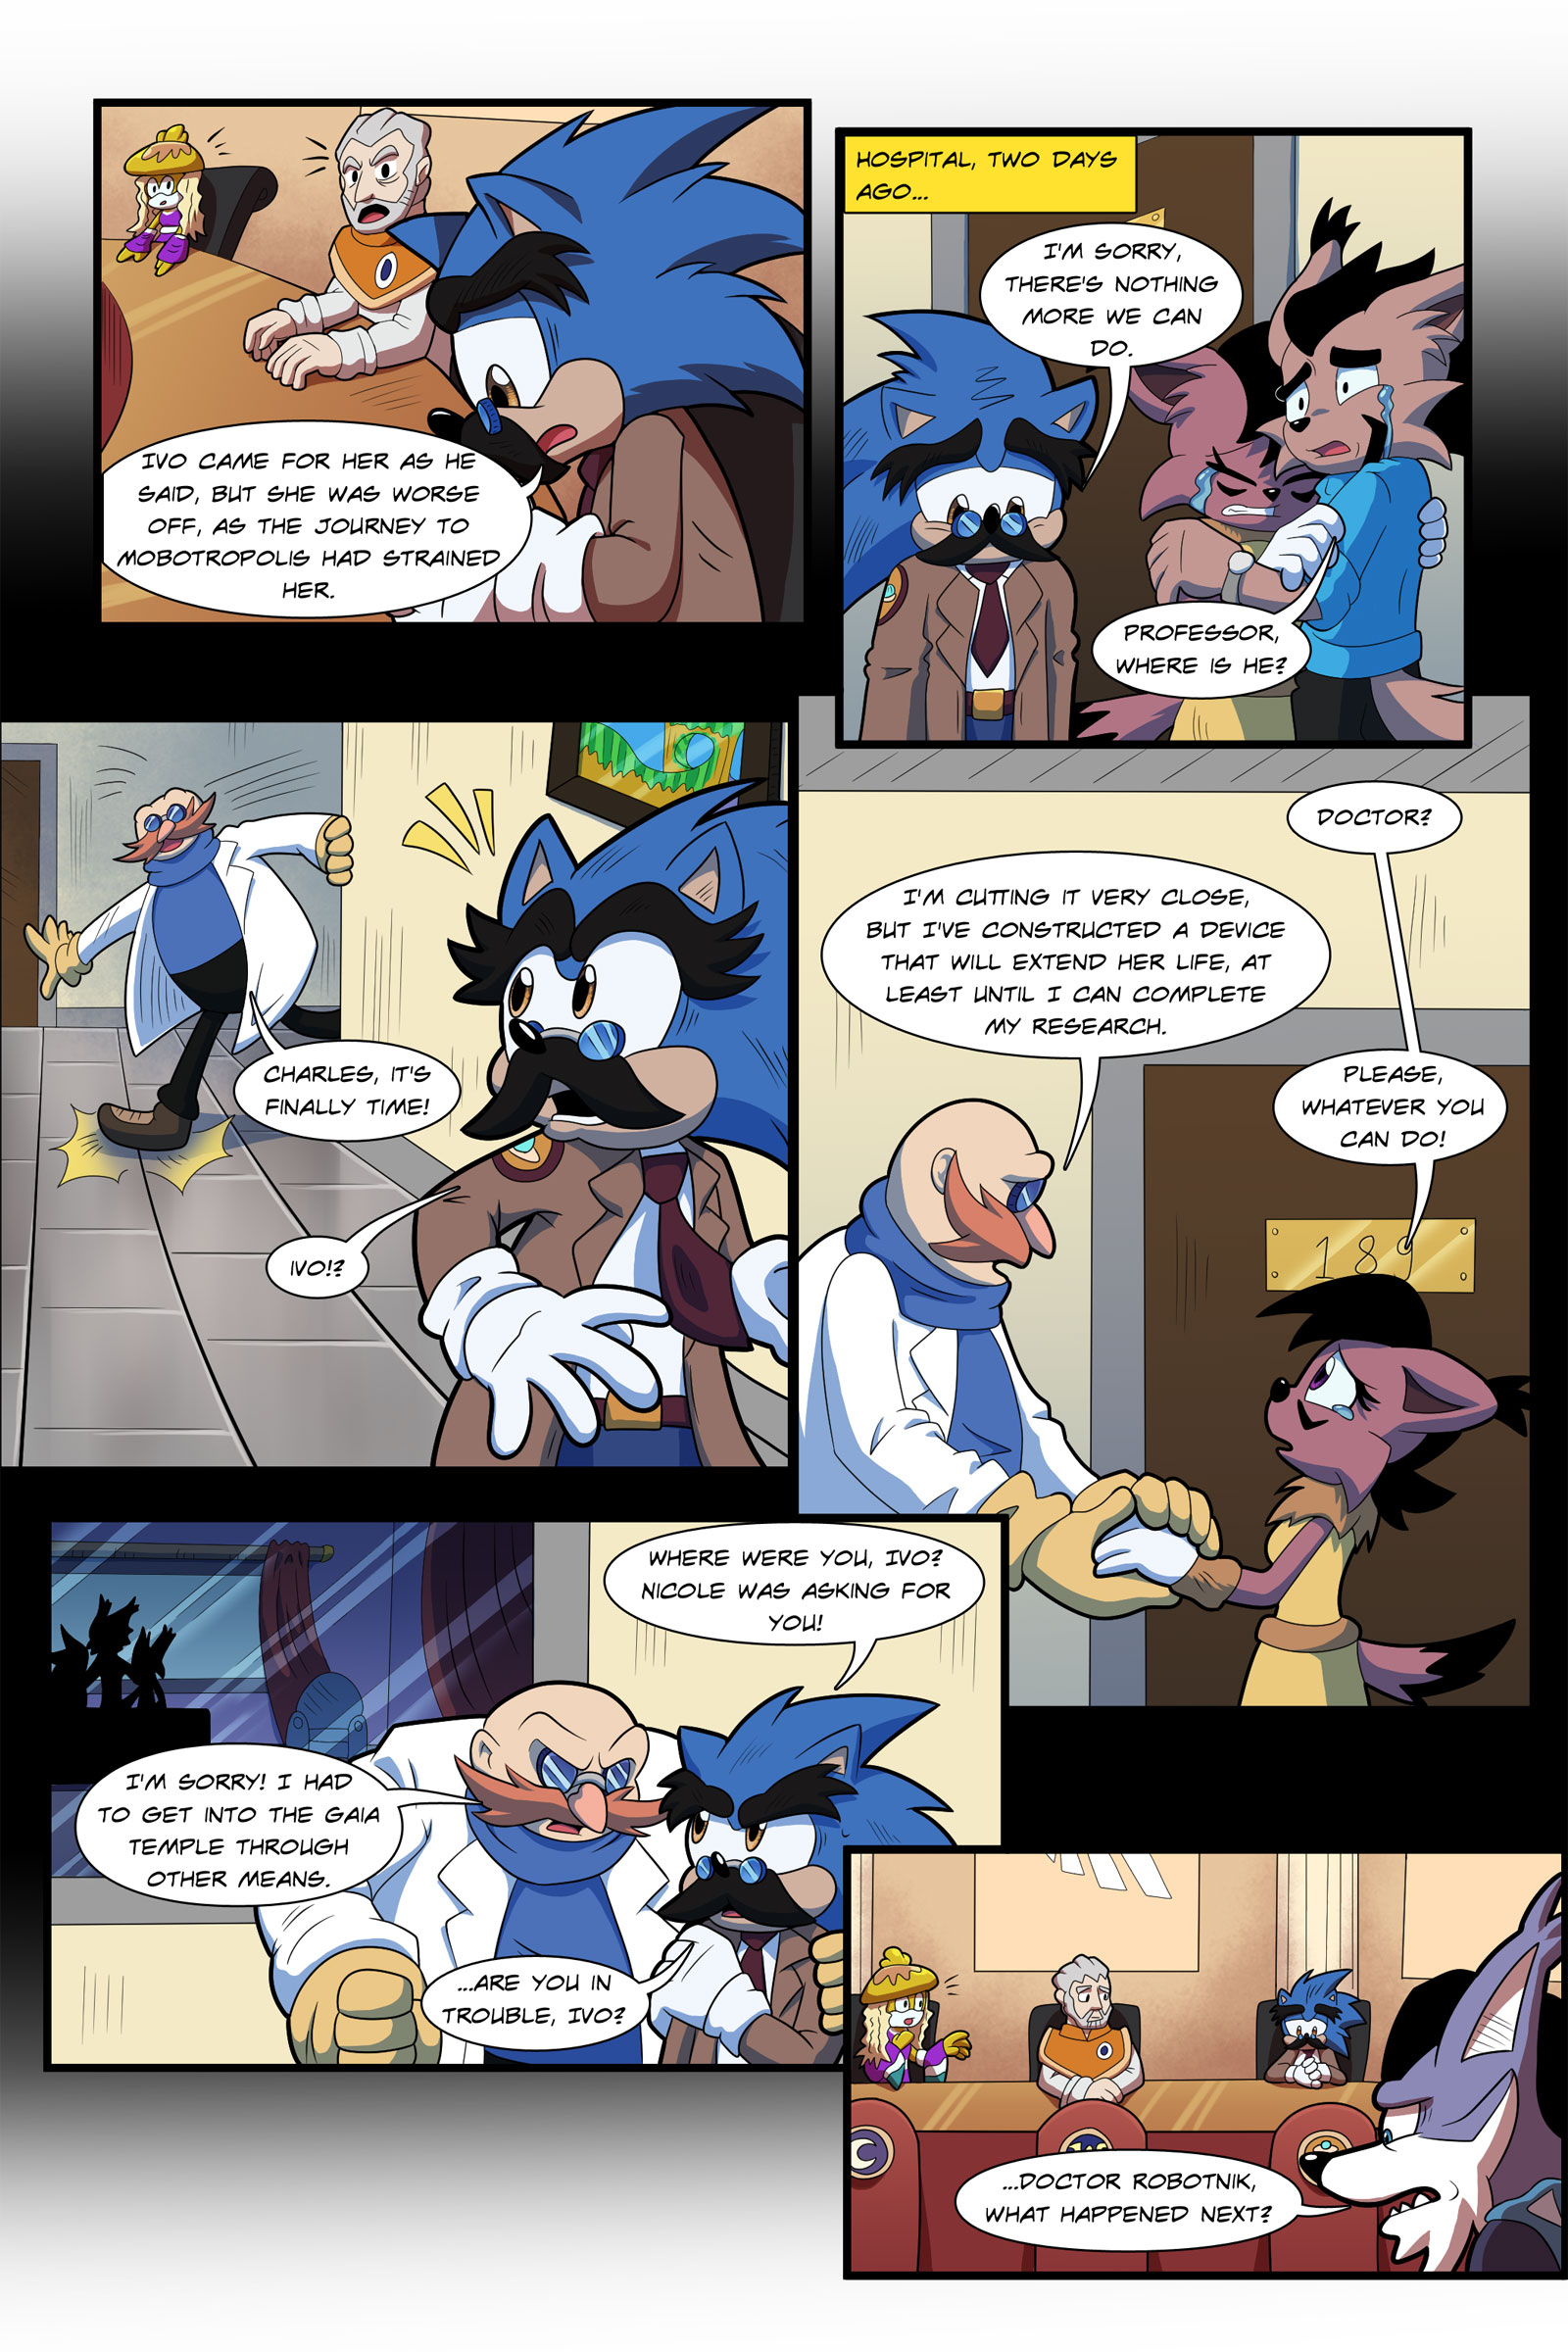 Mobius Legacy Comics Archives Sonic Legacy